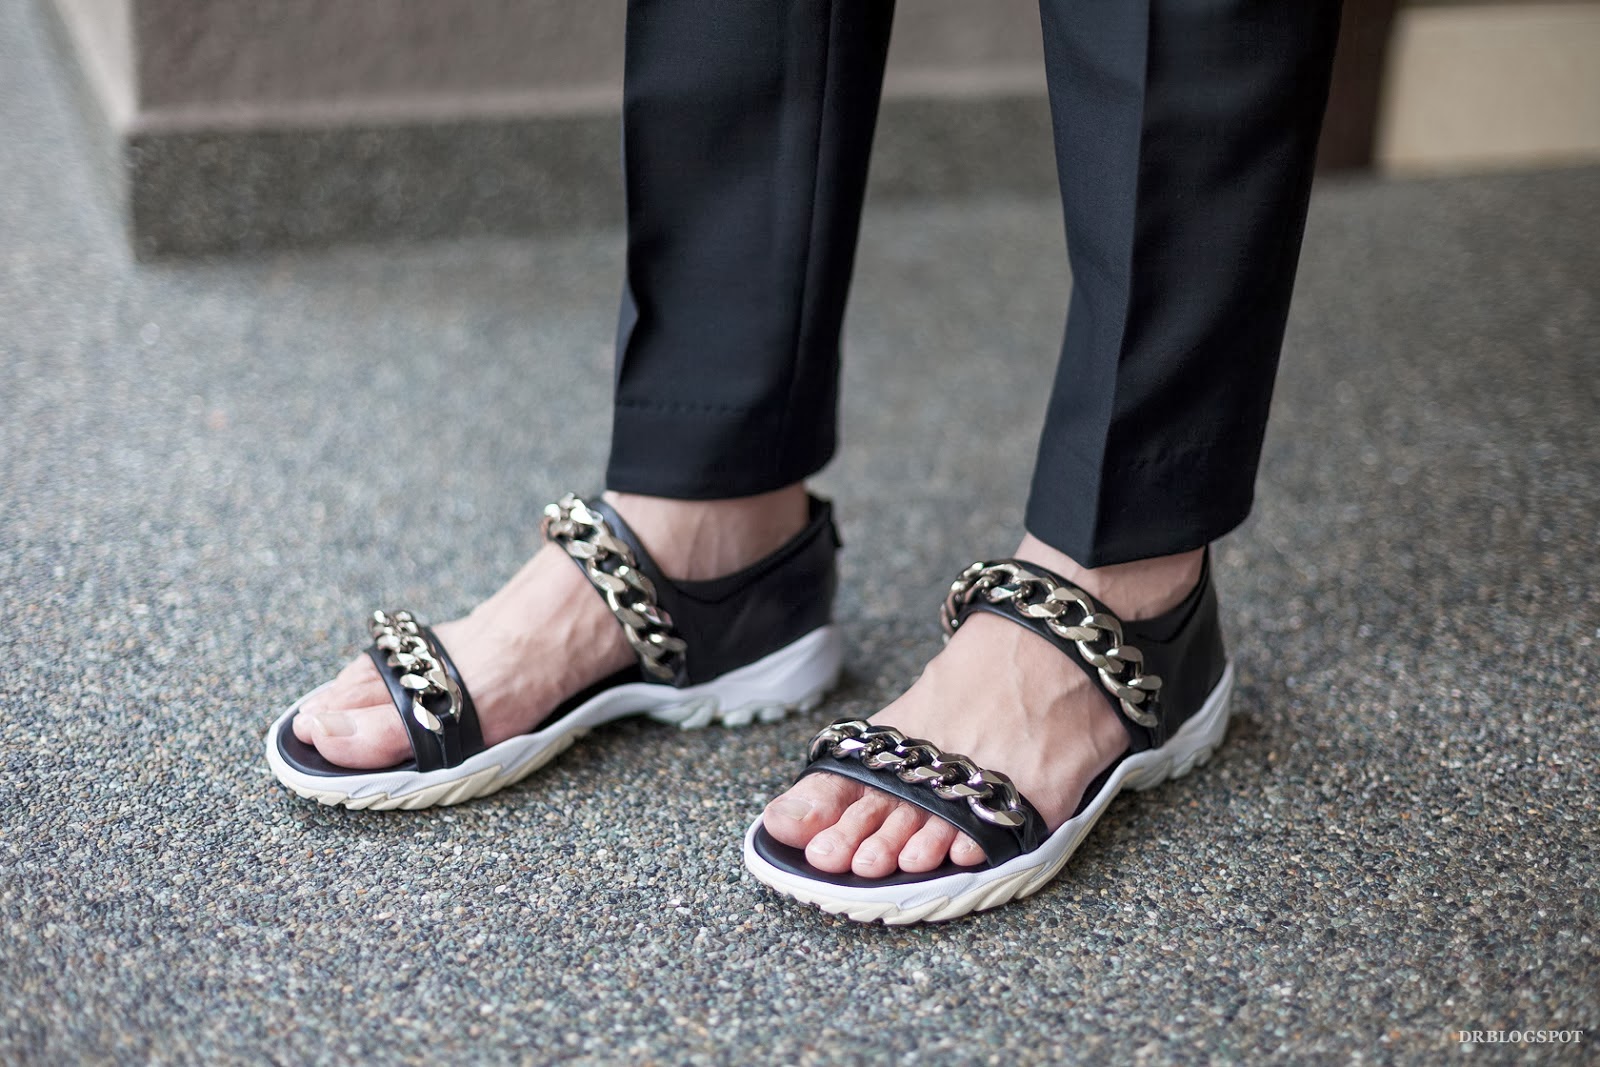 Givenchy Palladio Chain Detail Black Leather Sandals Pre-Spring 2014